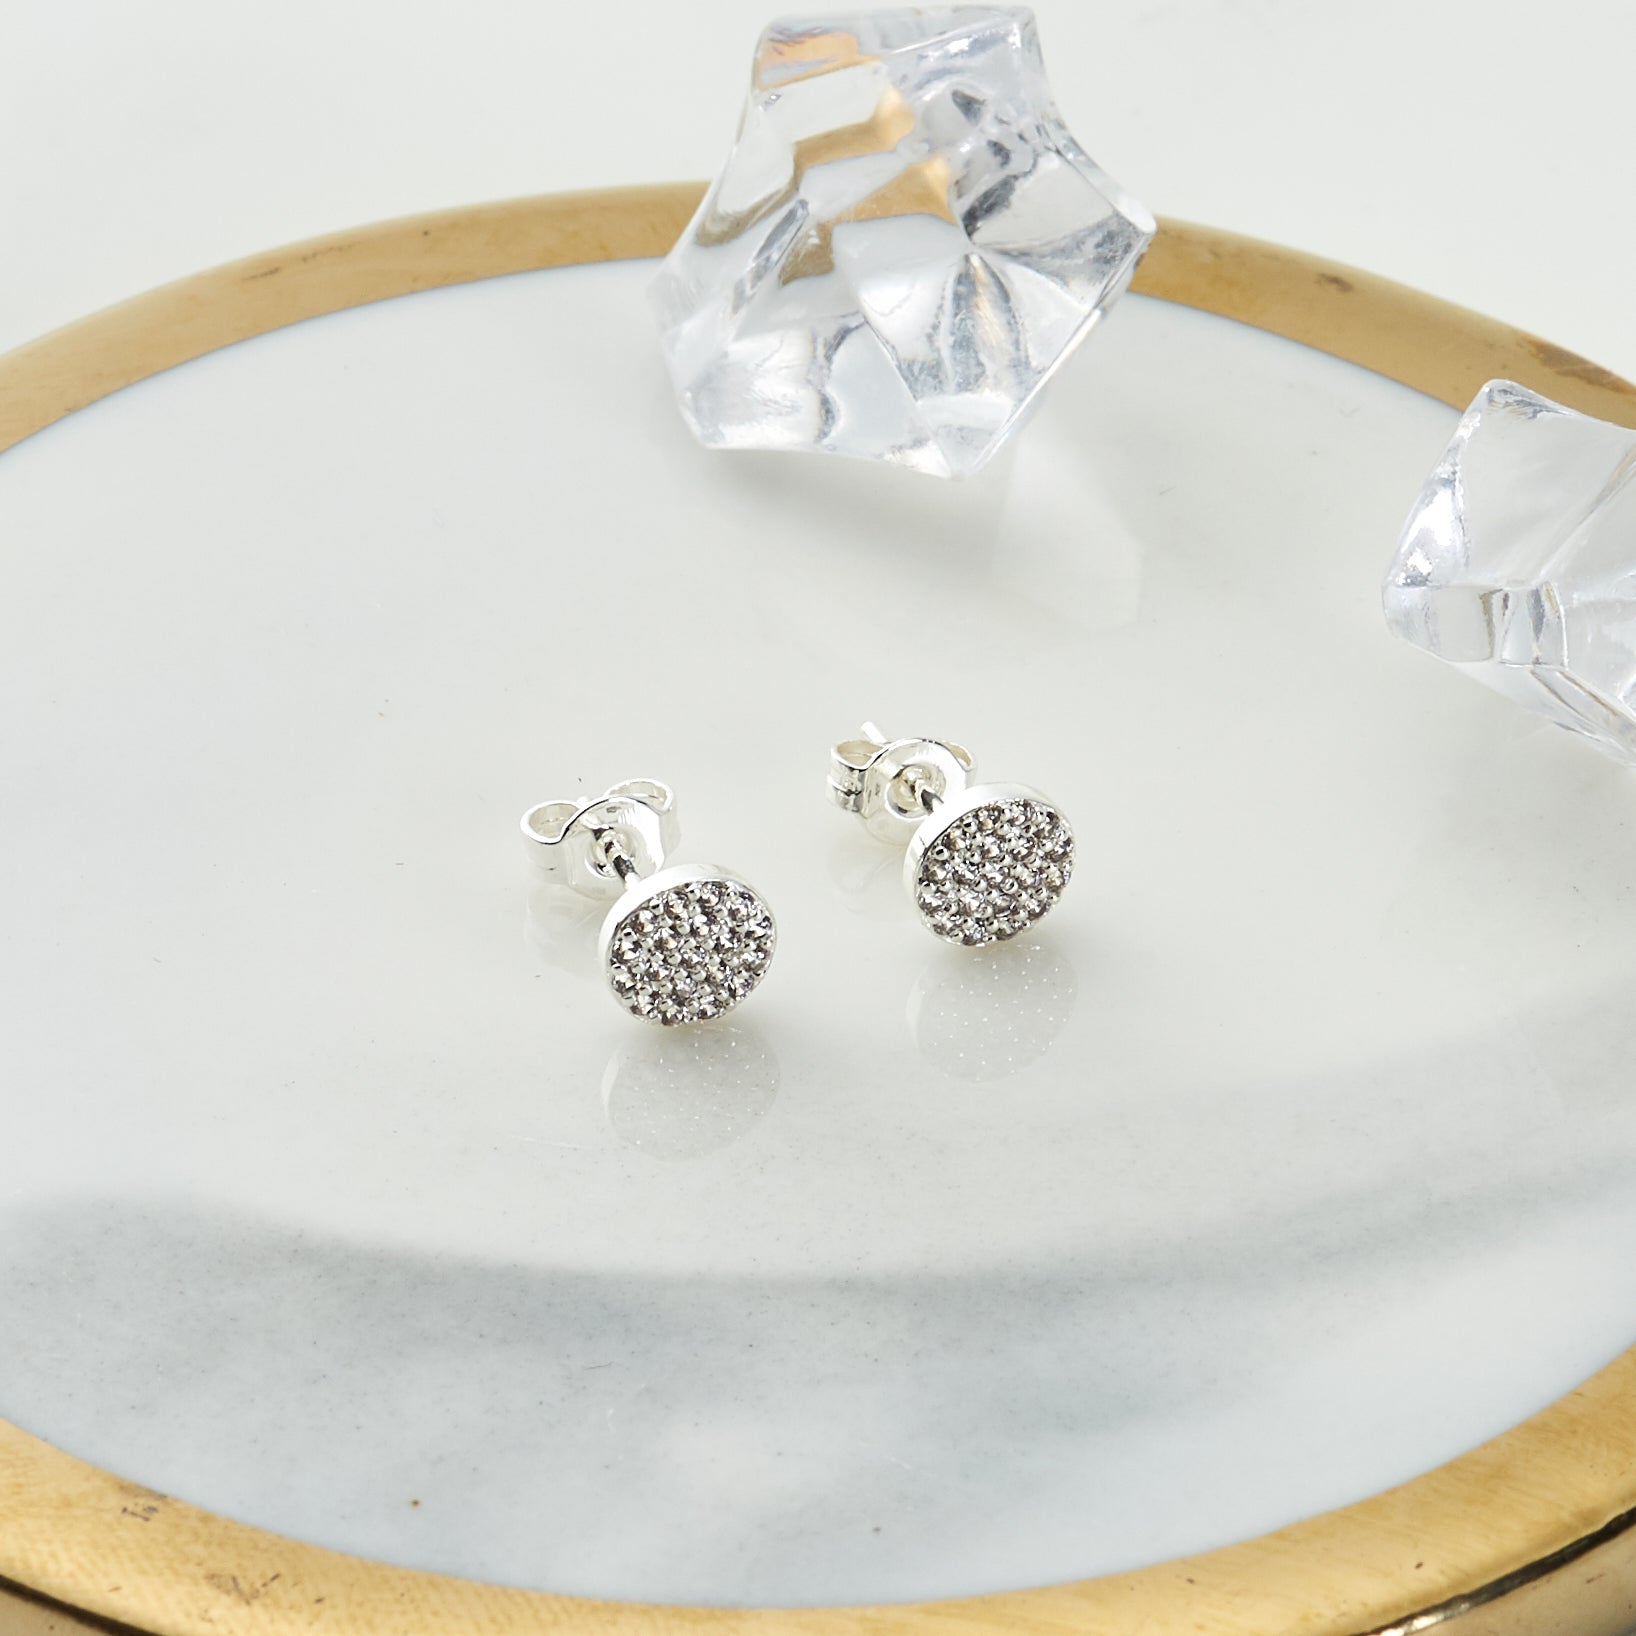 Silver Plated Pave Round Earrings Created with Zircondia® Crystals